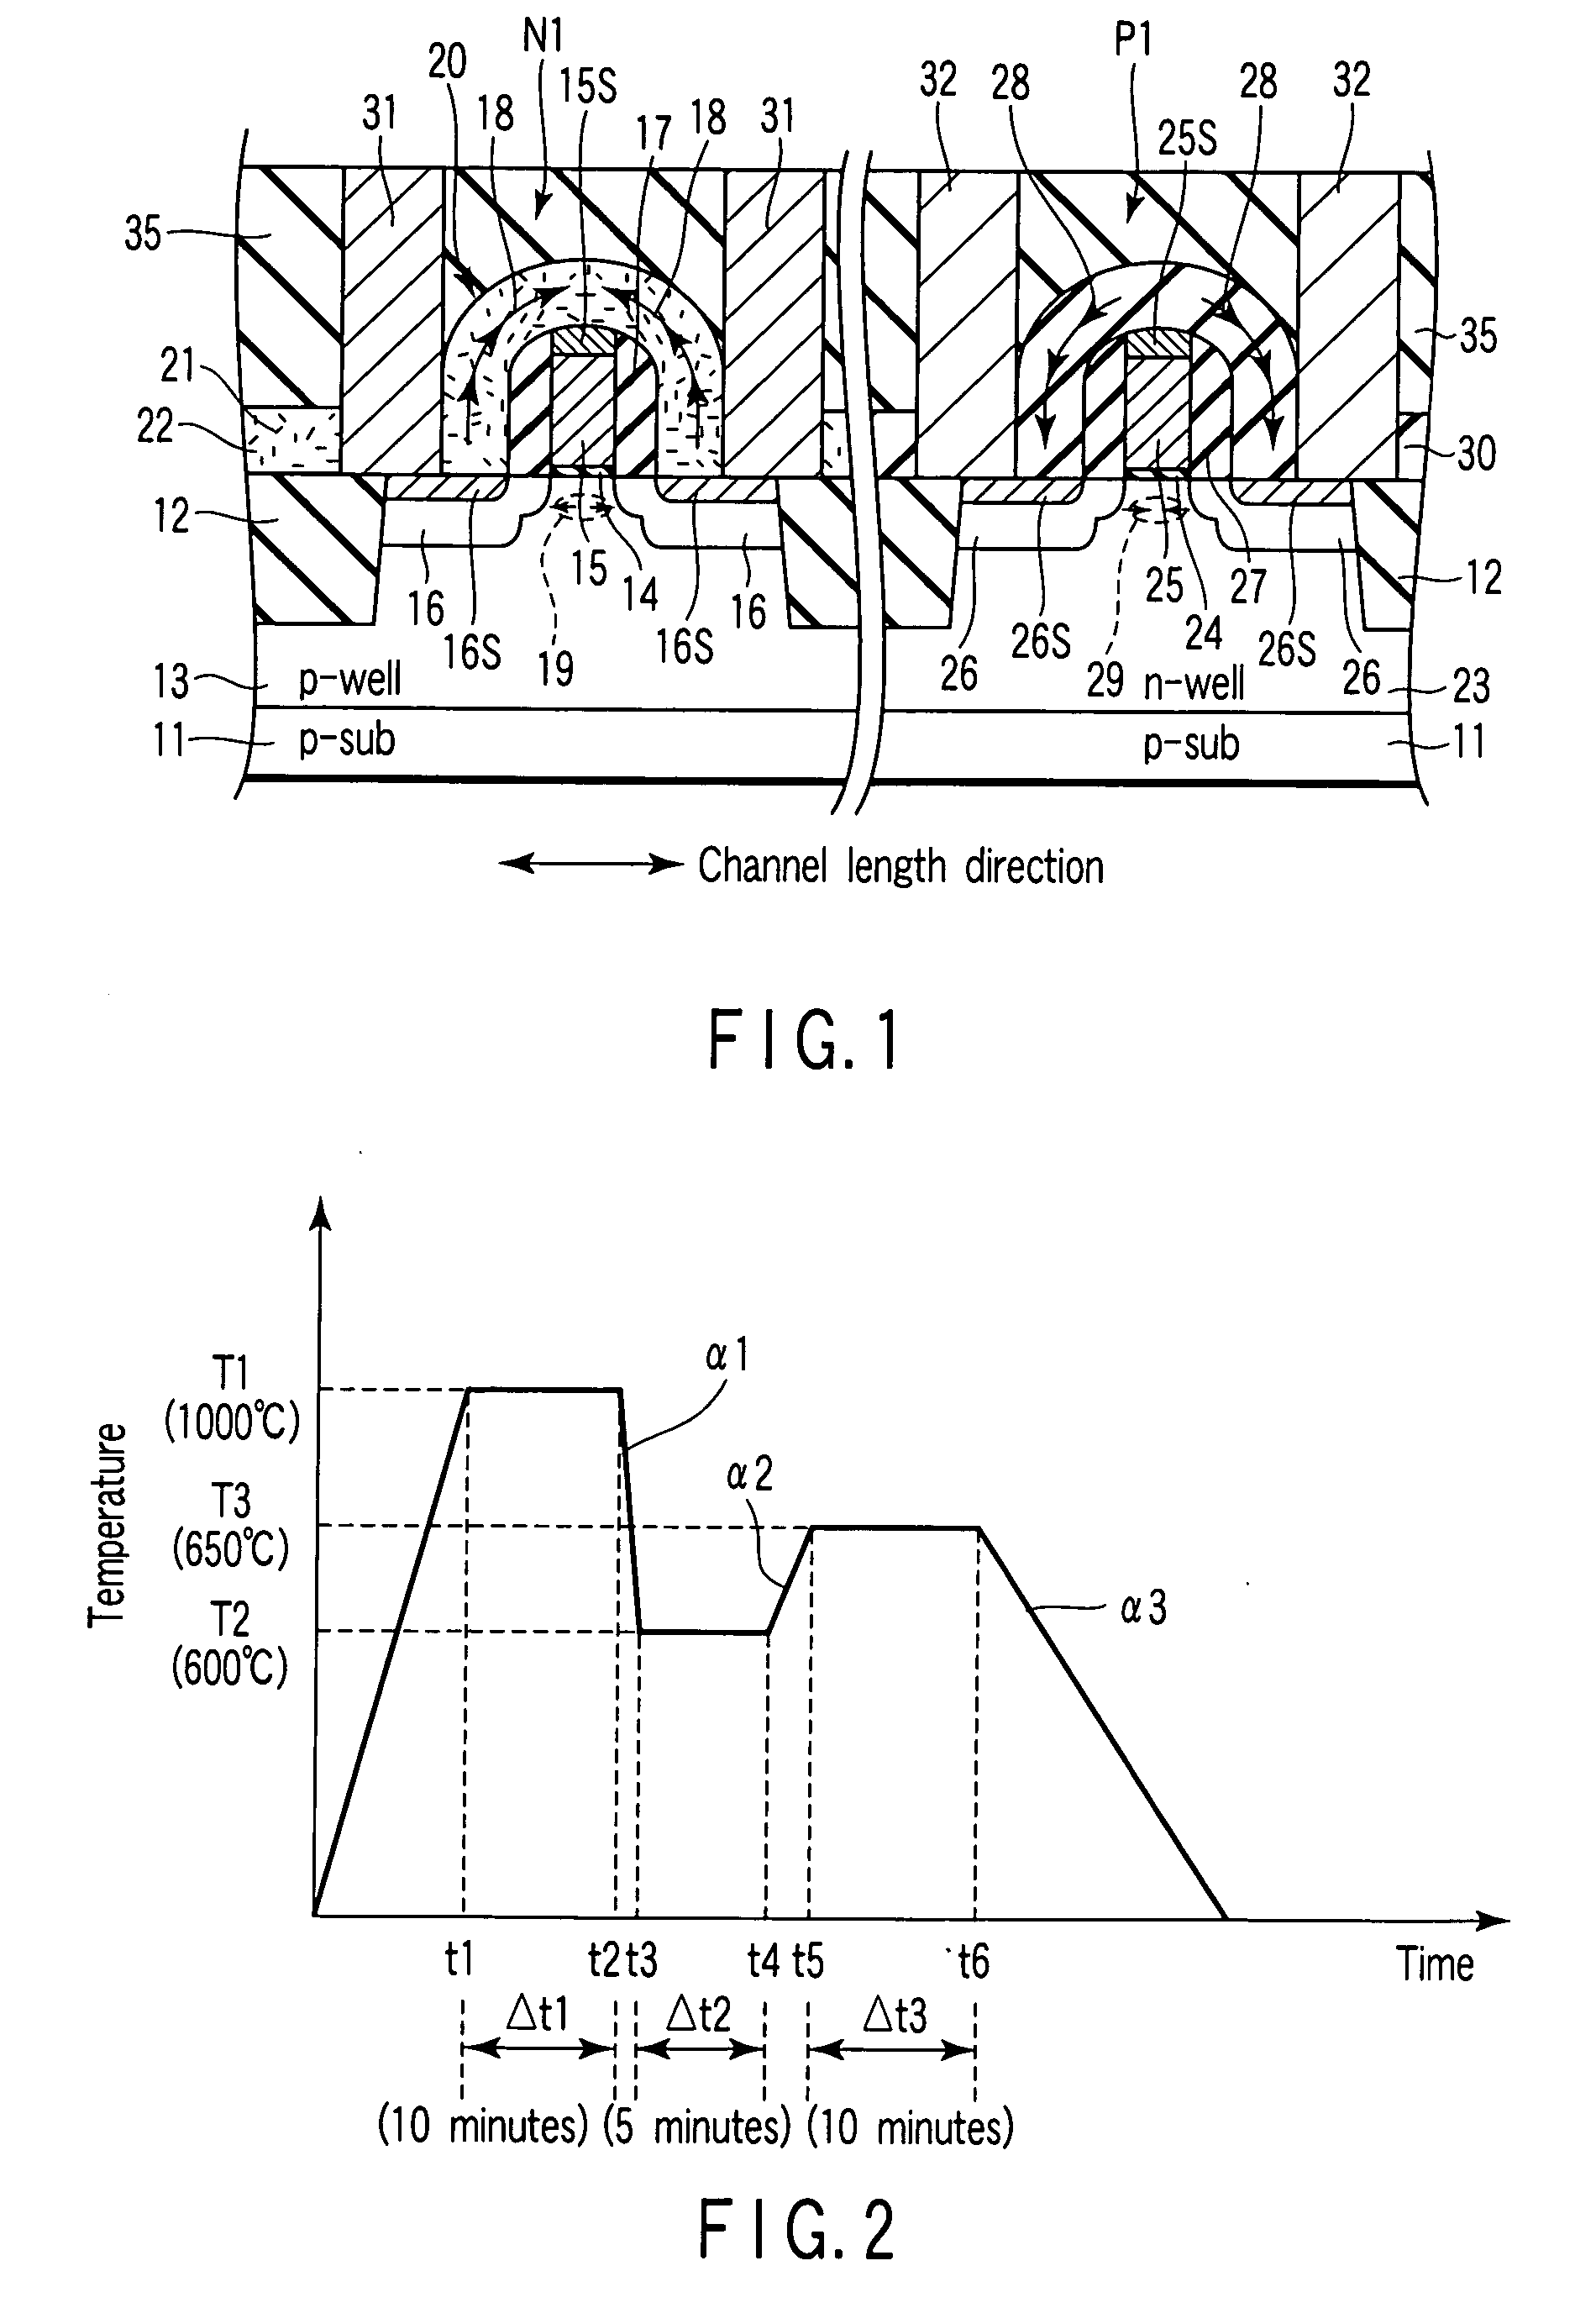 Semiconductor device that is advantageous in operational environment at high temperatures